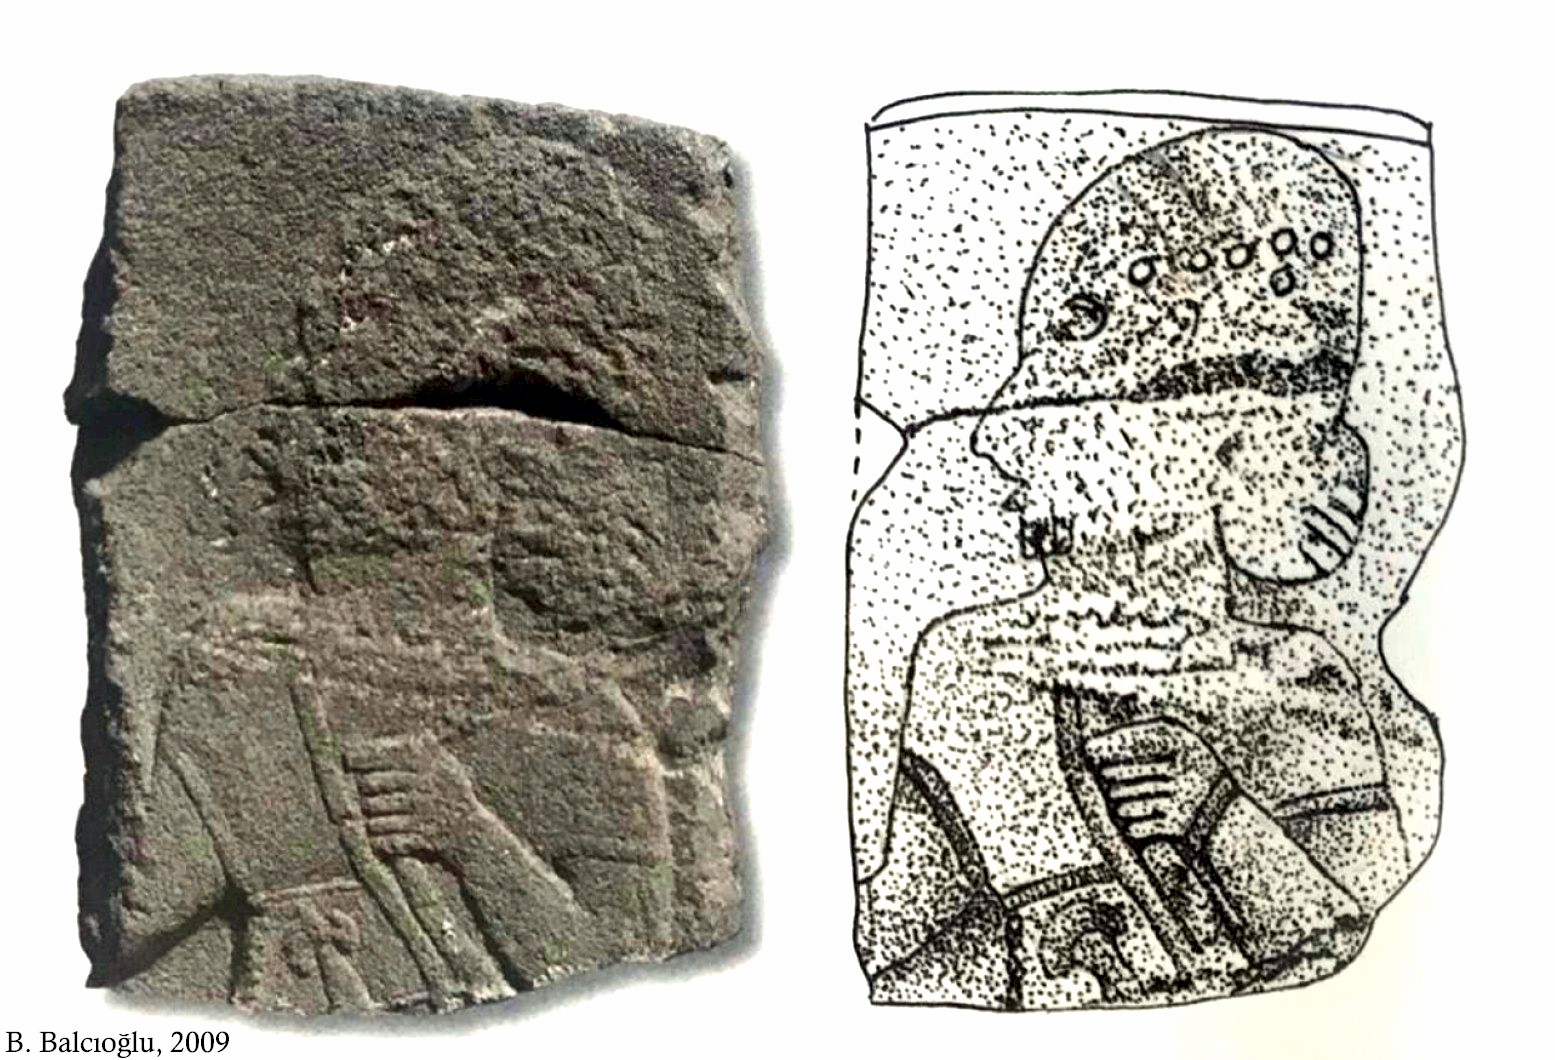 A photo and a drawing of the stele as published by B. Balcıoğlu in 2009